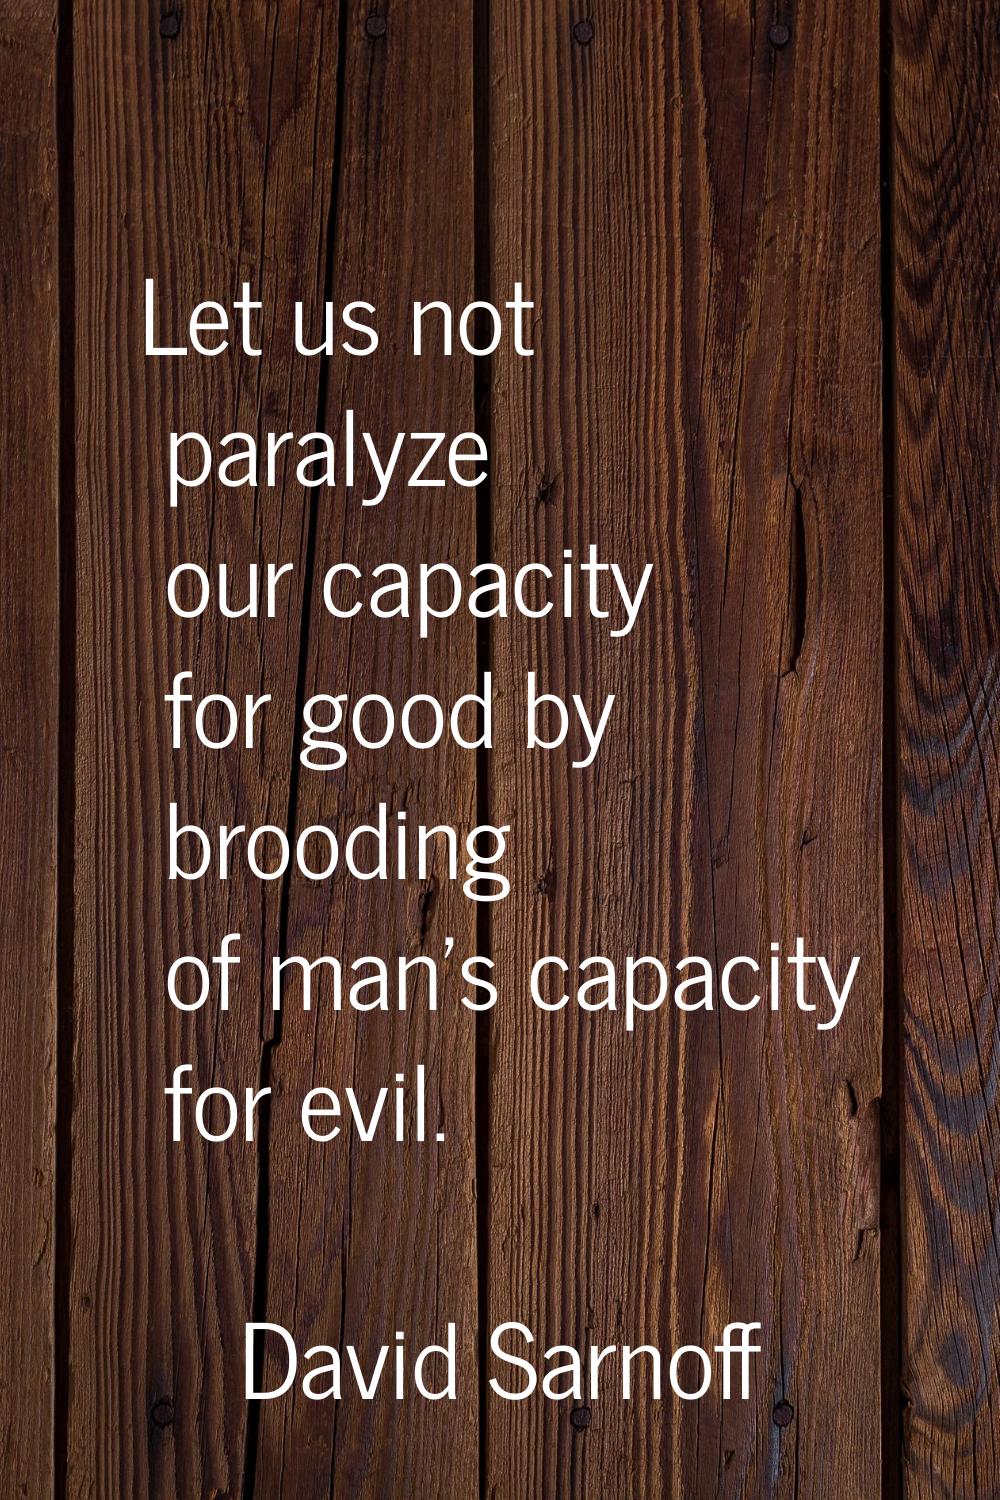 Let us not paralyze our capacity for good by brooding of man's capacity for evil.